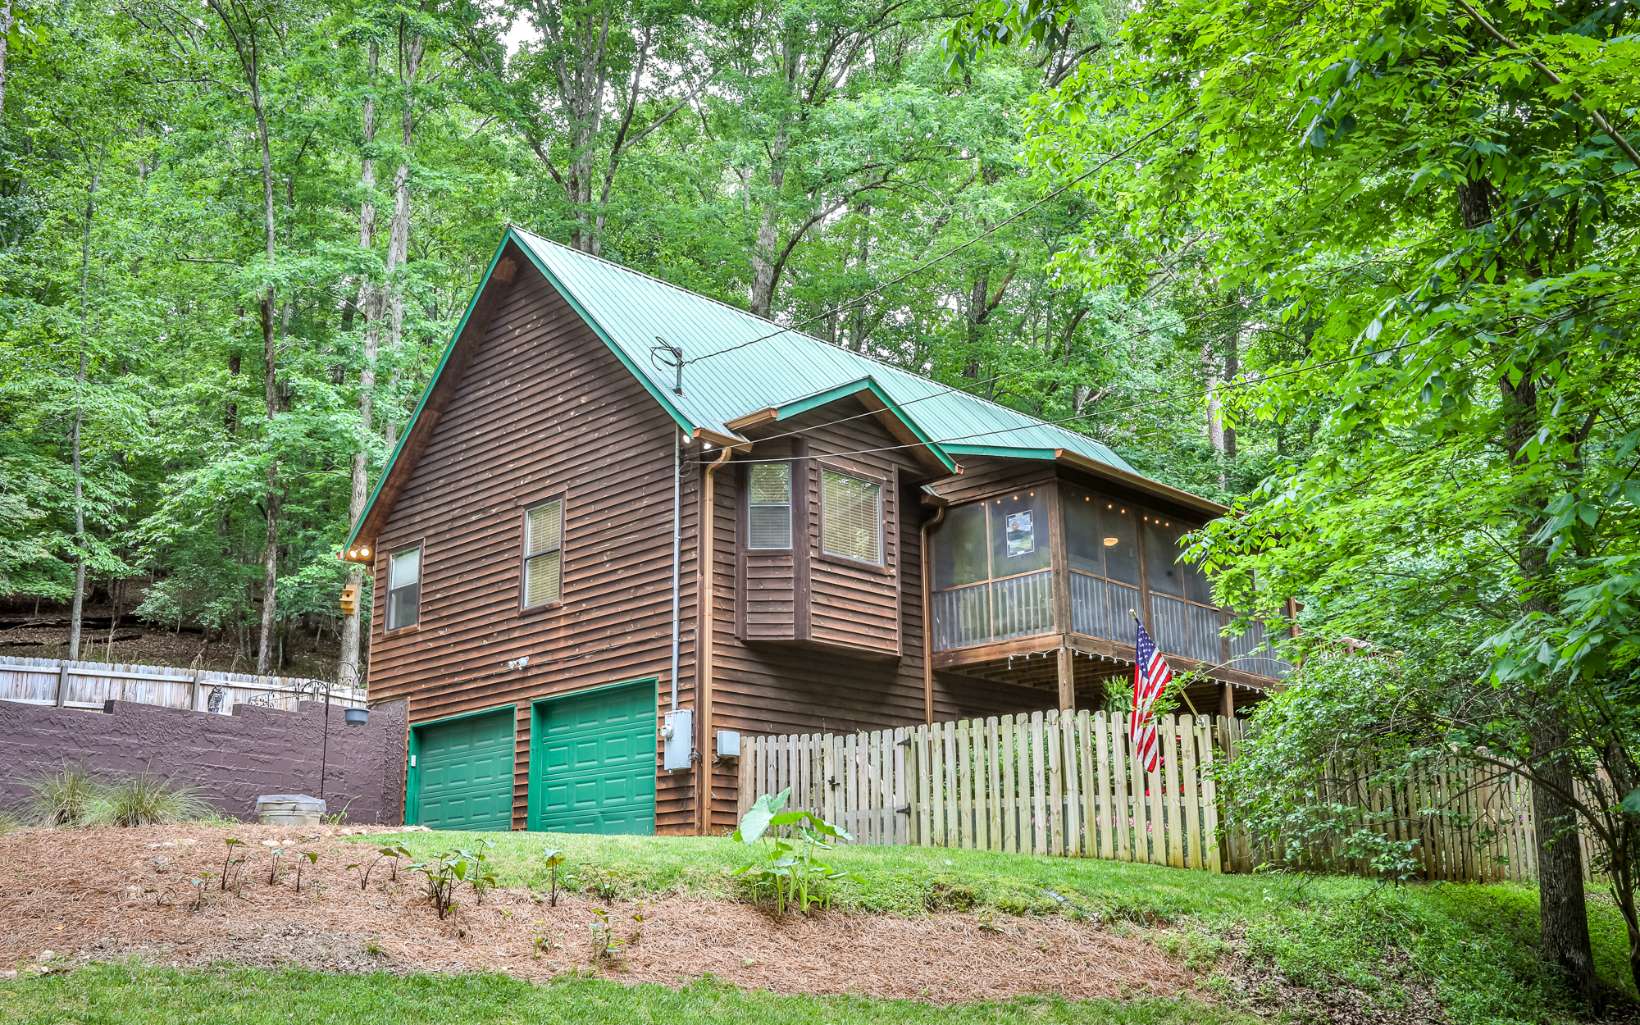 Come to a Tree House Cabin situated near the Coosawattee River, close enough to enjoy river sounds, a beautiful garden, birds chirping, all as you relax on a roomy screened in porch. This 3/3 features, Cathderal Ceilings, Pine floors, Stone Fireplace, granite Kitchen counters, gas range Large pantry and Split bedroom plan on the Main. A Roomy loft provides extra living, while the Spacious Master Bedroom features big windows,a walk in closet, jetted tub and double vanities. The terrace level has a bedroom/full bath, and an extra room for guests, games, a studio, or workspace. Lower level also features a floral inspired patio w/ Fenced in area for pets and a gardening area ready for your inspiration. Top this off w/ a 2 car garage, Plenty of parking, outside fire pit, 2 decks, end of road privacy,all paved roads and easy access. Located in Coosawattee River Resort, with Pools, Fitness center, pickleball courts, tennis courts, the river, trails and much more.